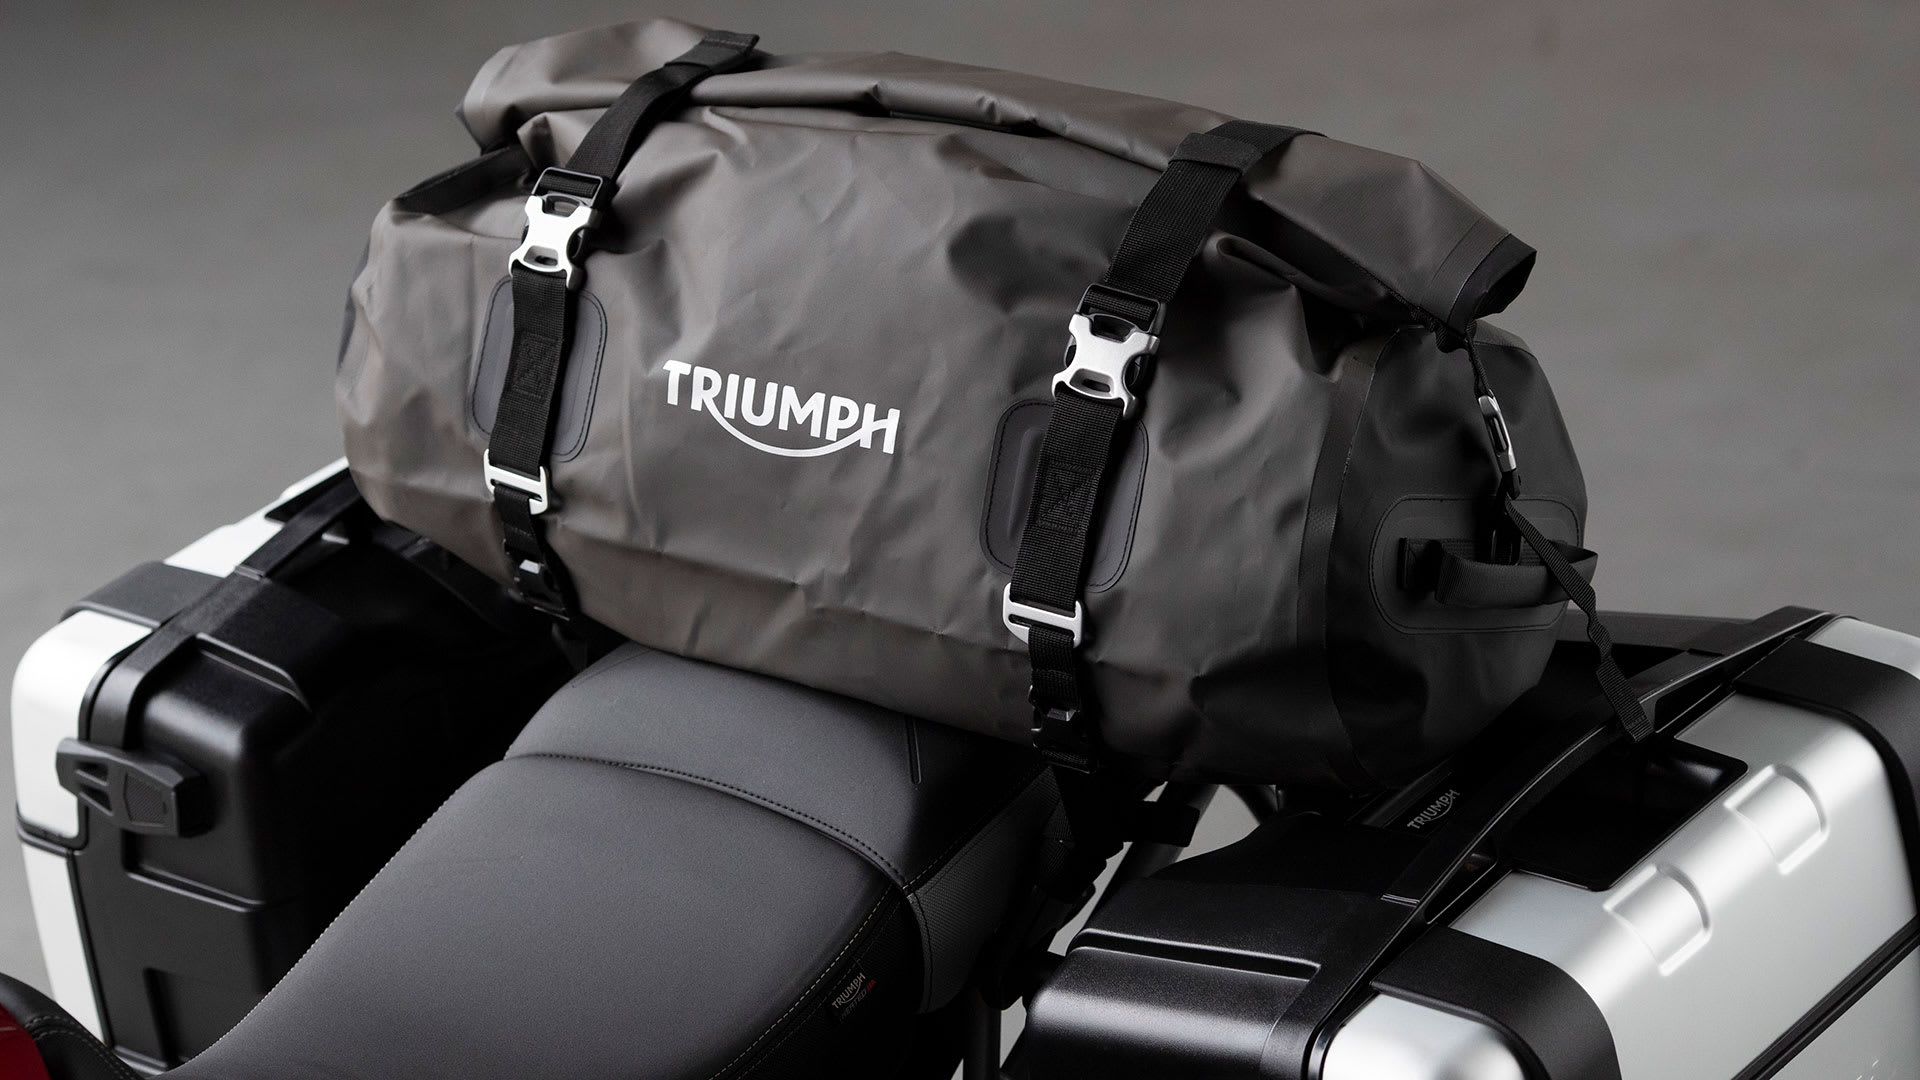 Triumph Tiger 900 luggage collection